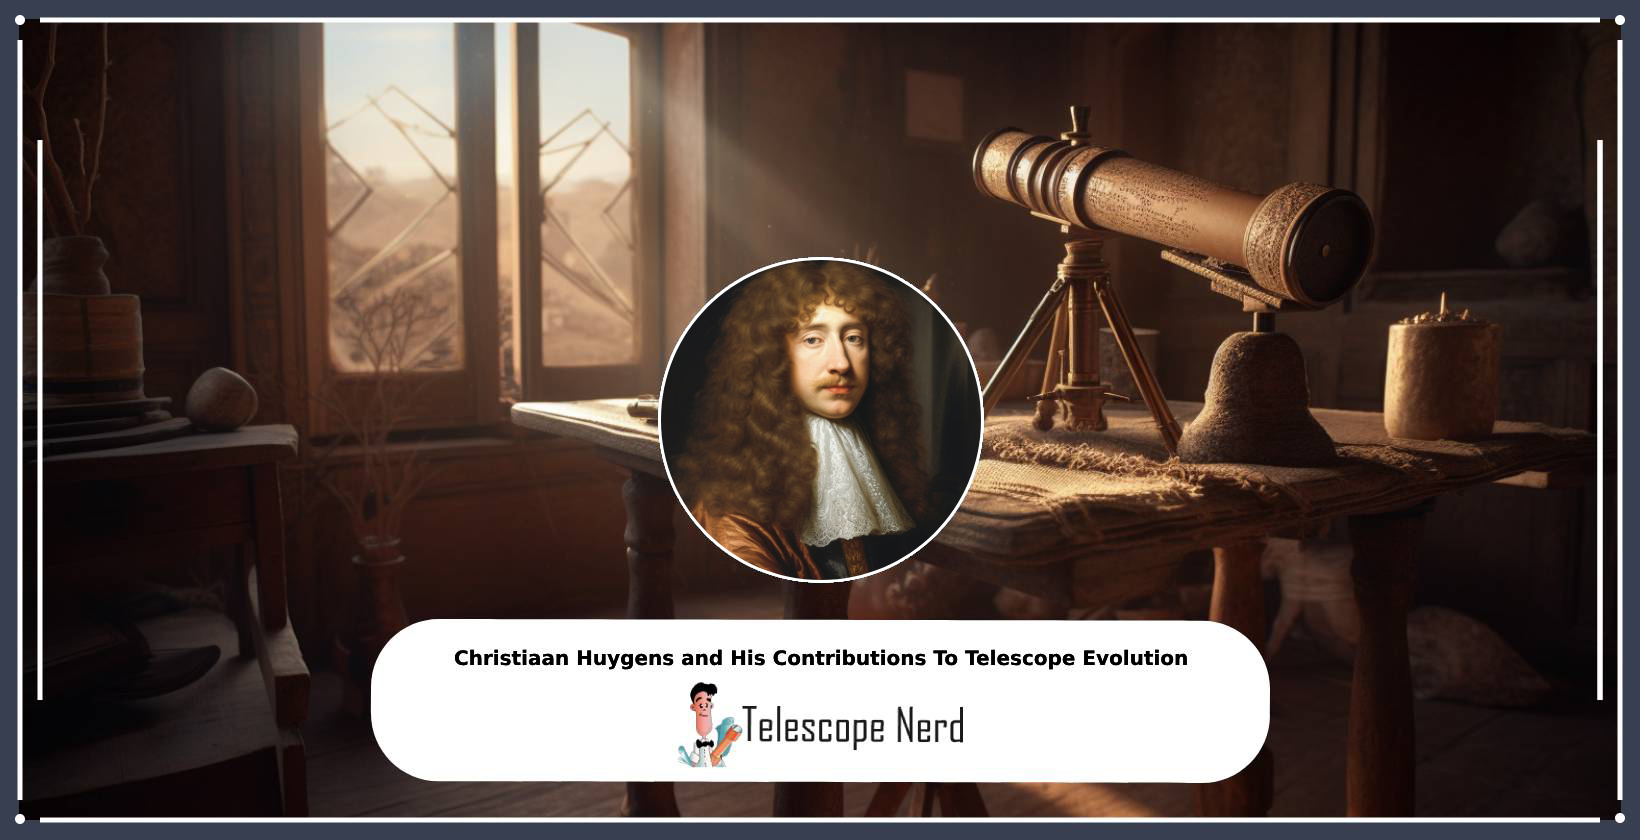 Christiaan Huygens mathematician and his contributions to telescope development